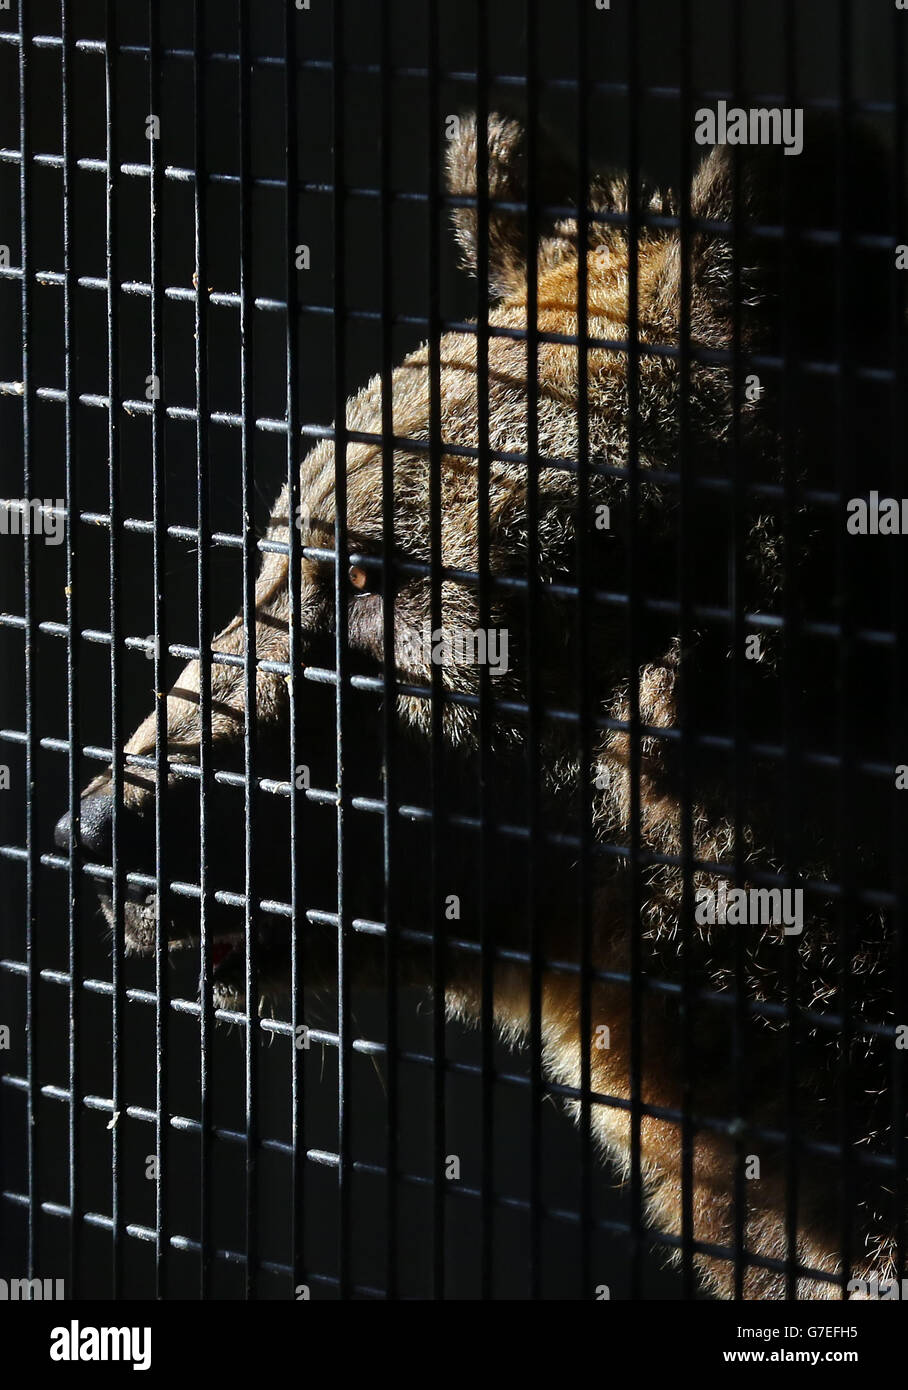 Milcho, a European Brown Bear, peers out of his quarantine enclosure at the Wildwood Animal Trust in Herne, Kent, following being rescued from an abandoned bear breeding centre in Bulgaria suffering from neglect. Stock Photo